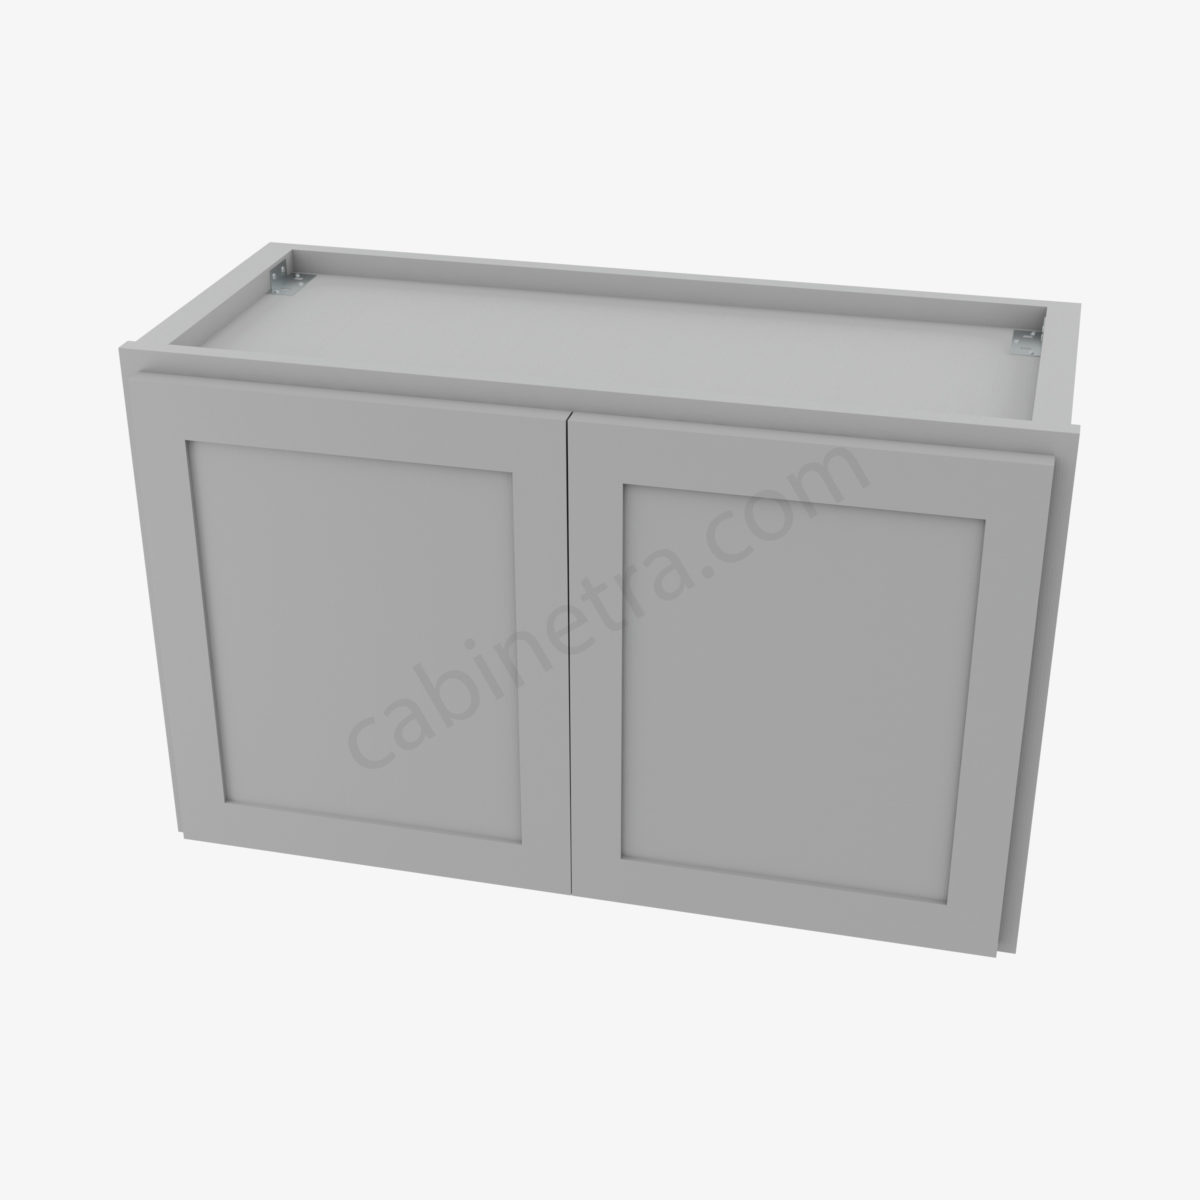 AB W3018B 3 Forevermark Lait Gray Shaker Cabinetra scaled